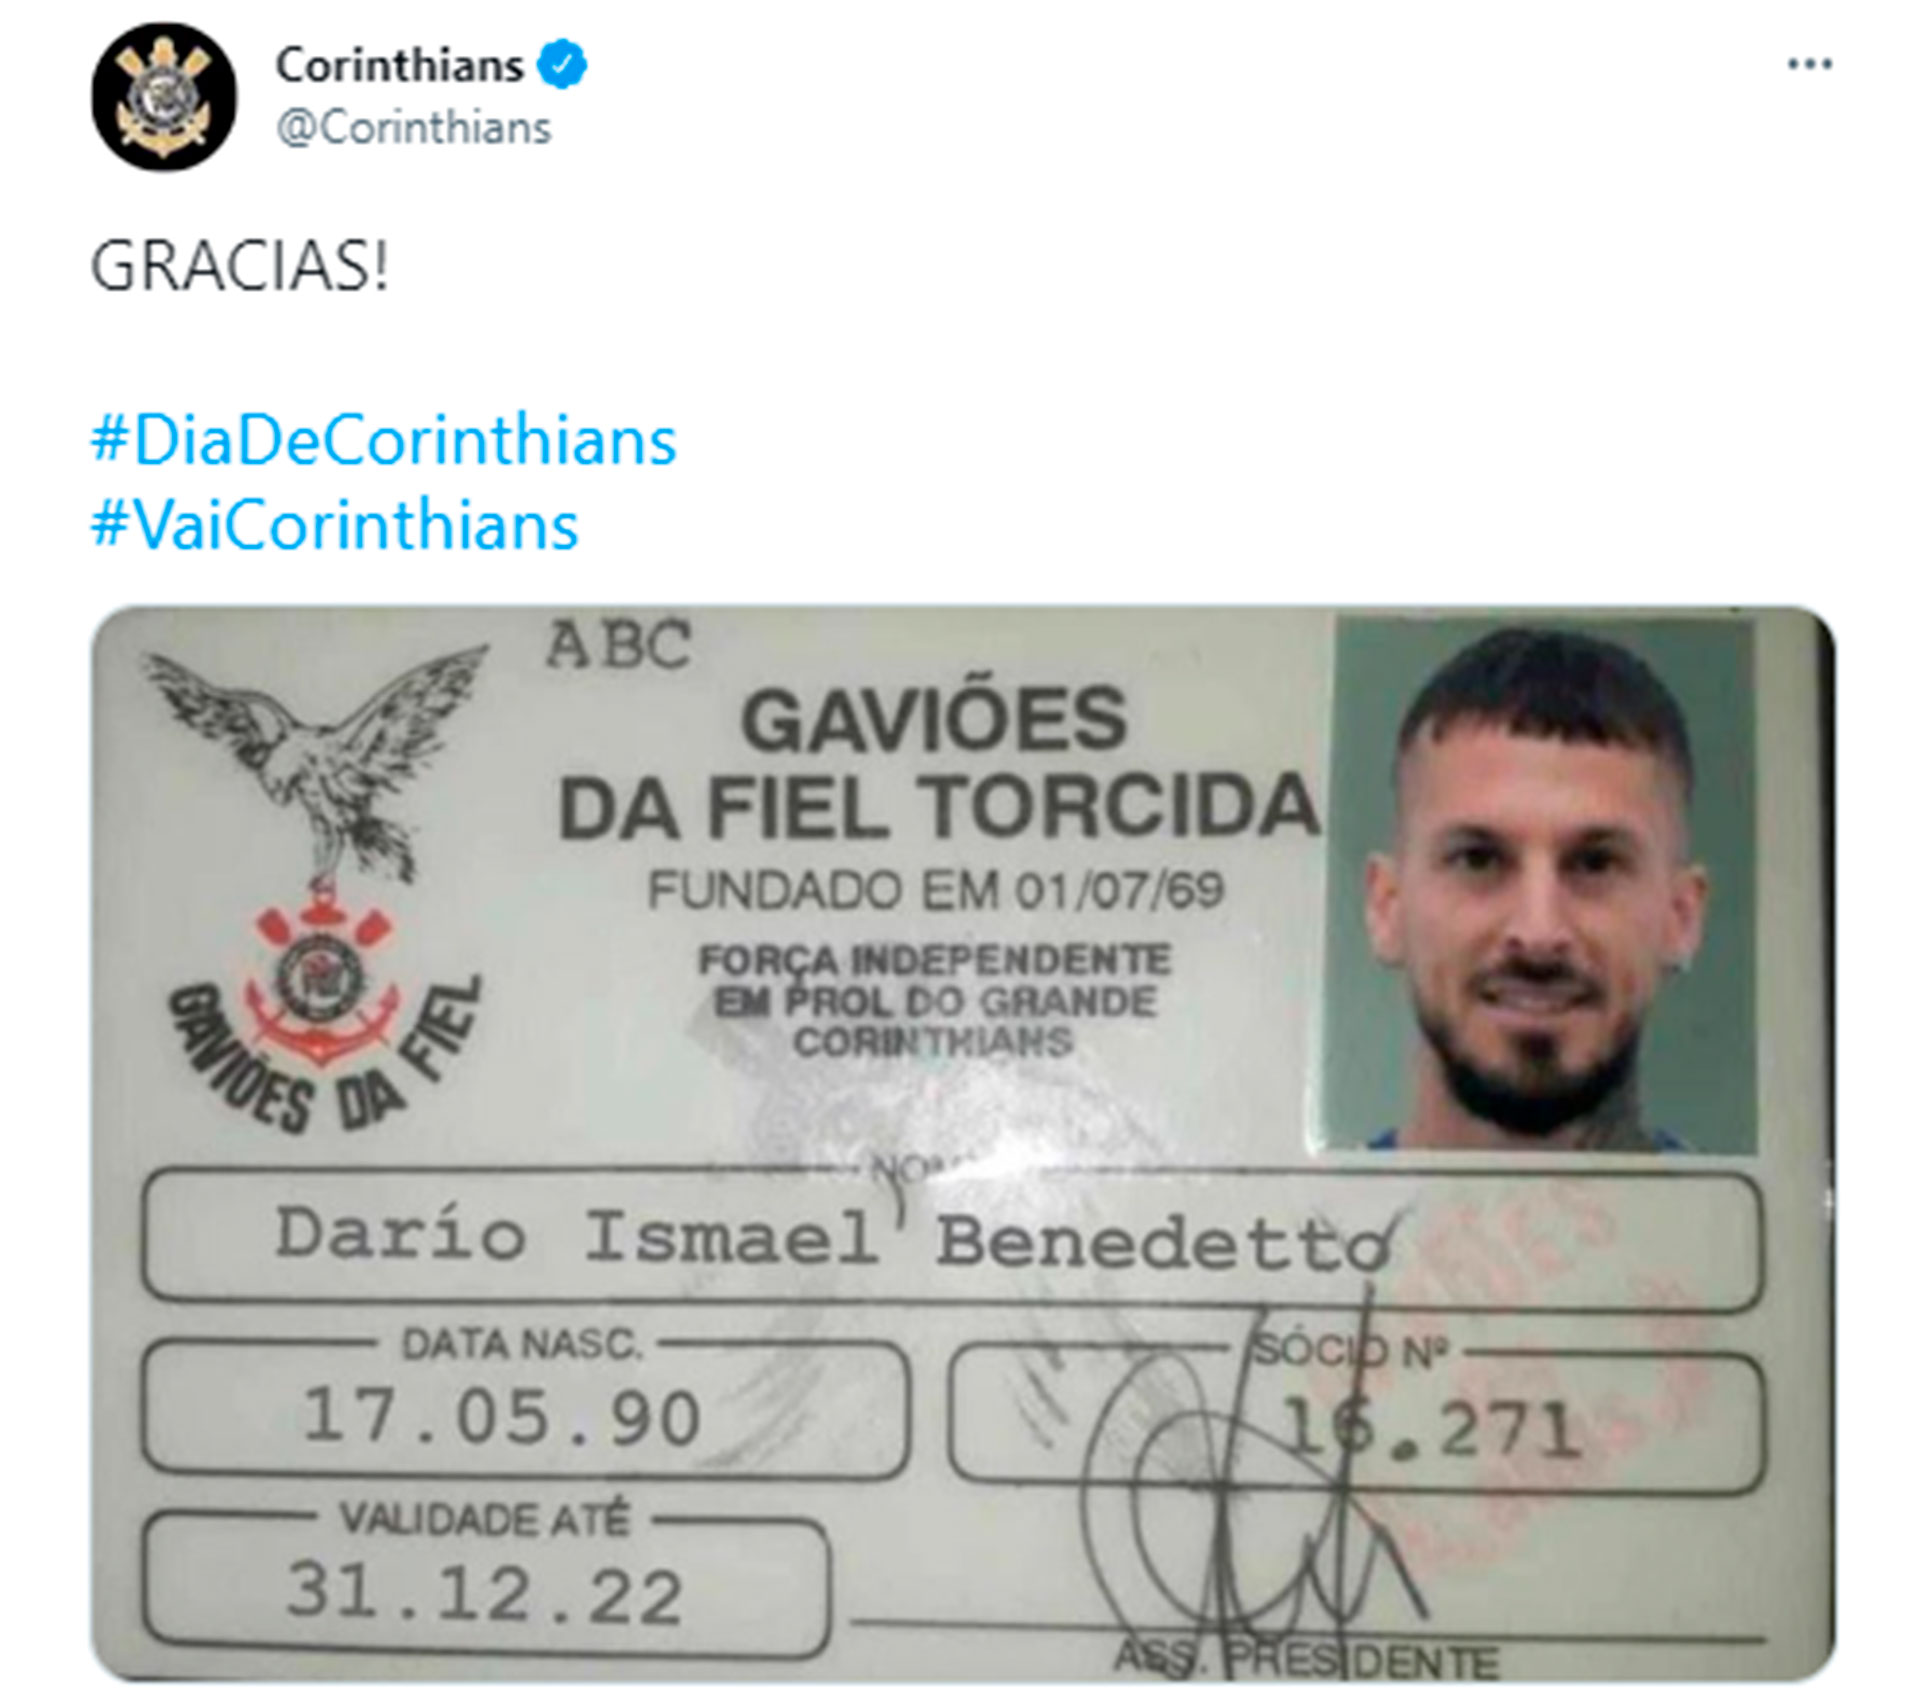 1657119455 The jokes from the Brasileirao and Corinthians accounts against Boca